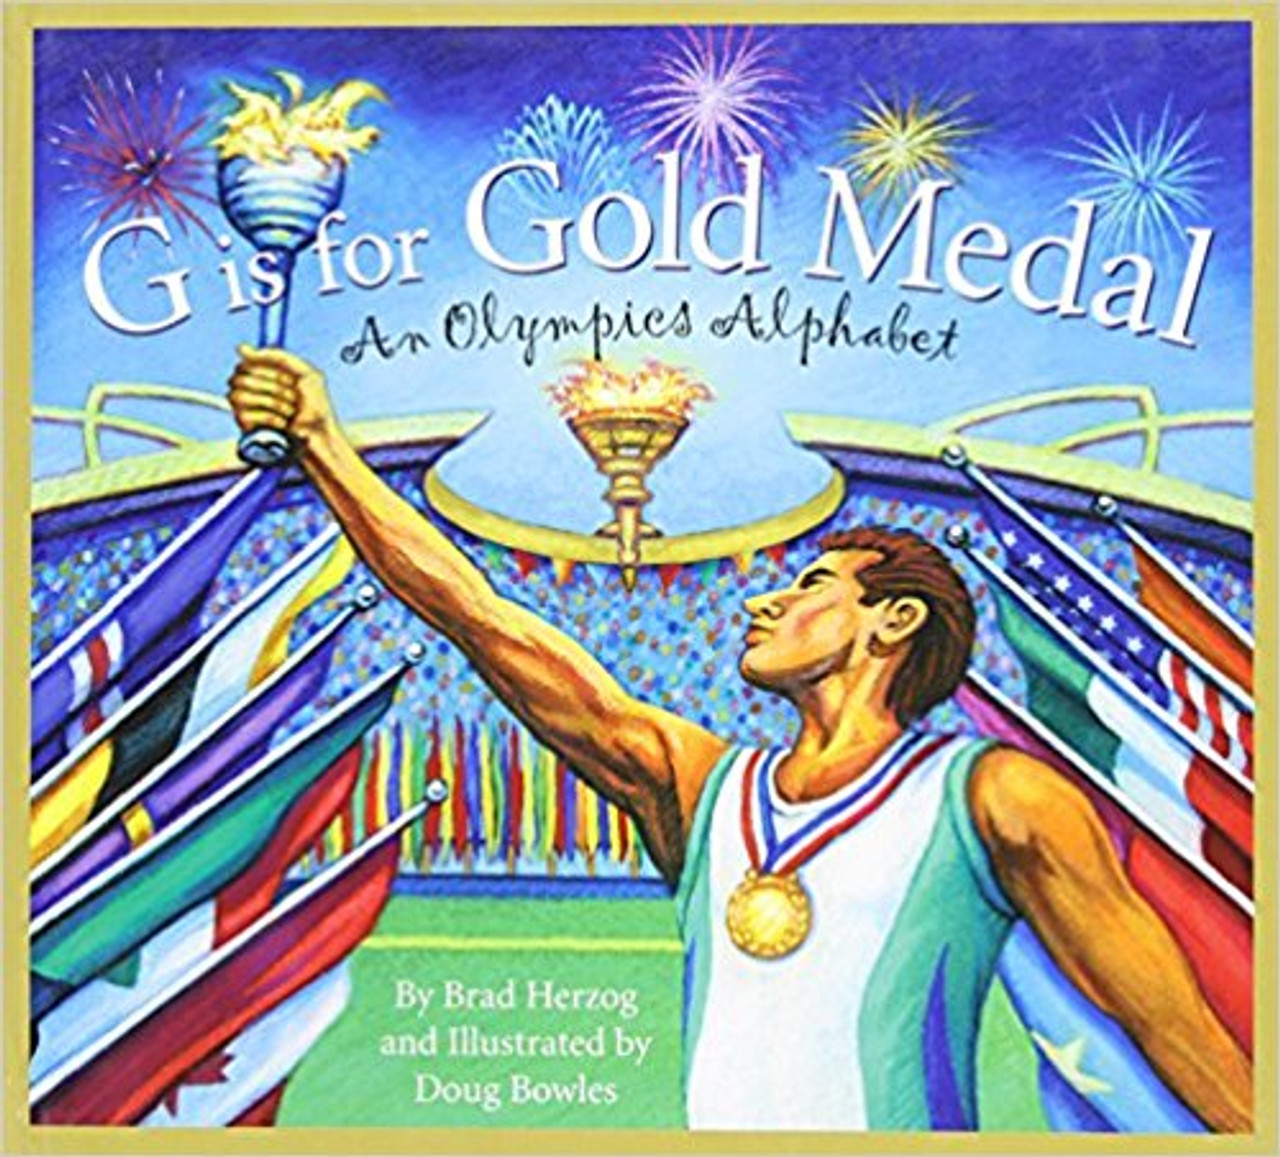 G is for Gold Medal: An Olympics Alphabet by Brad Herzog